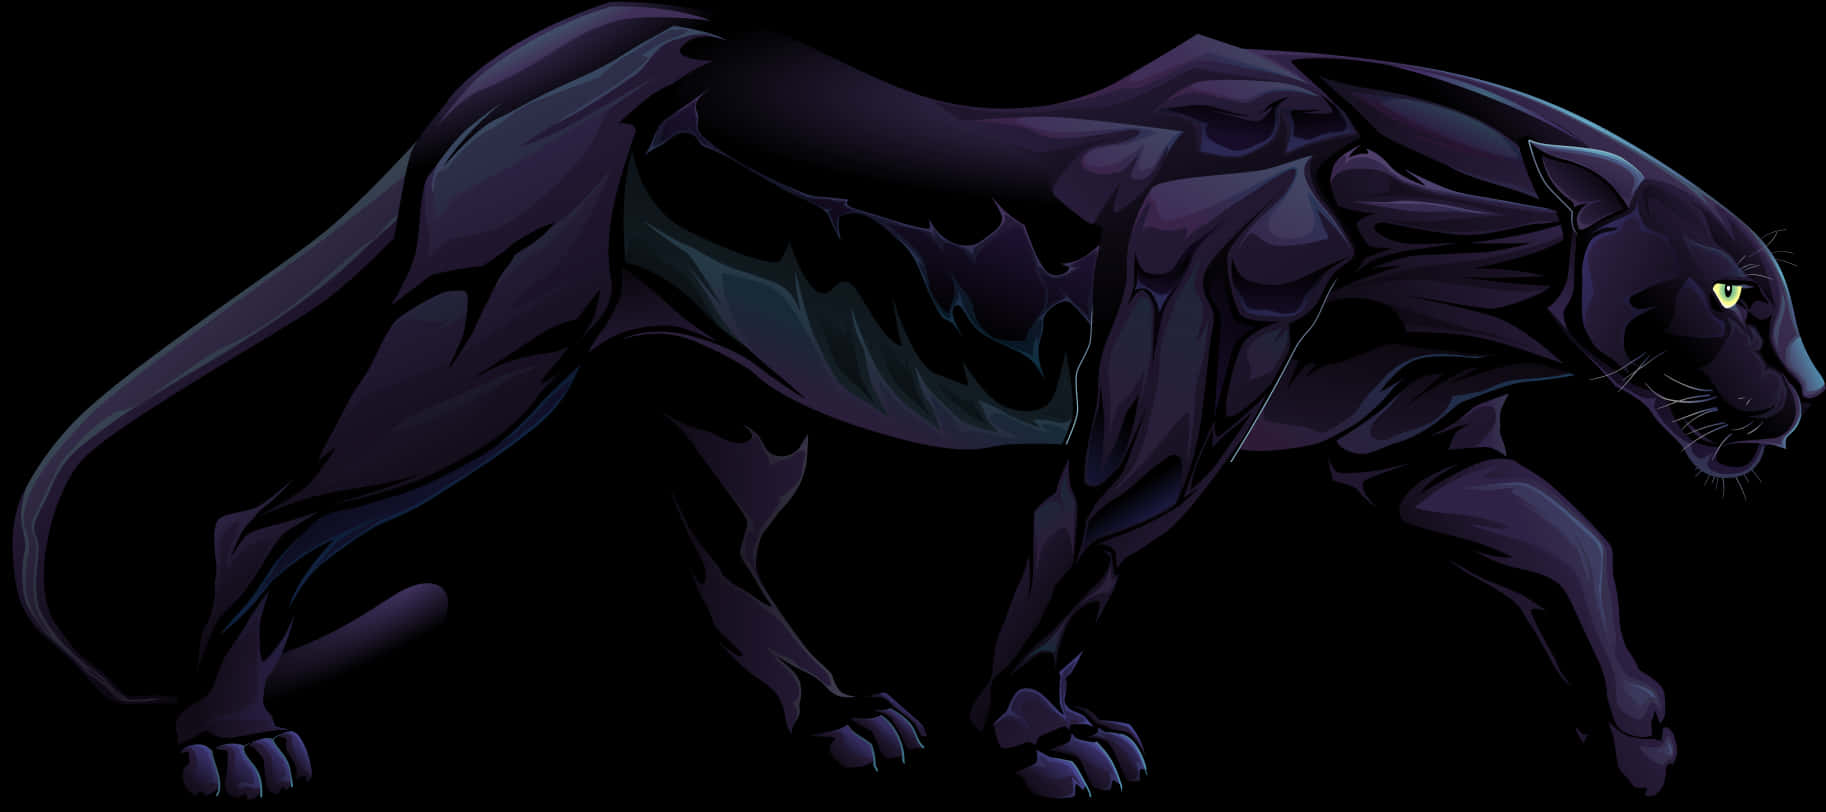 Stylized Black Panther Artwork PNG